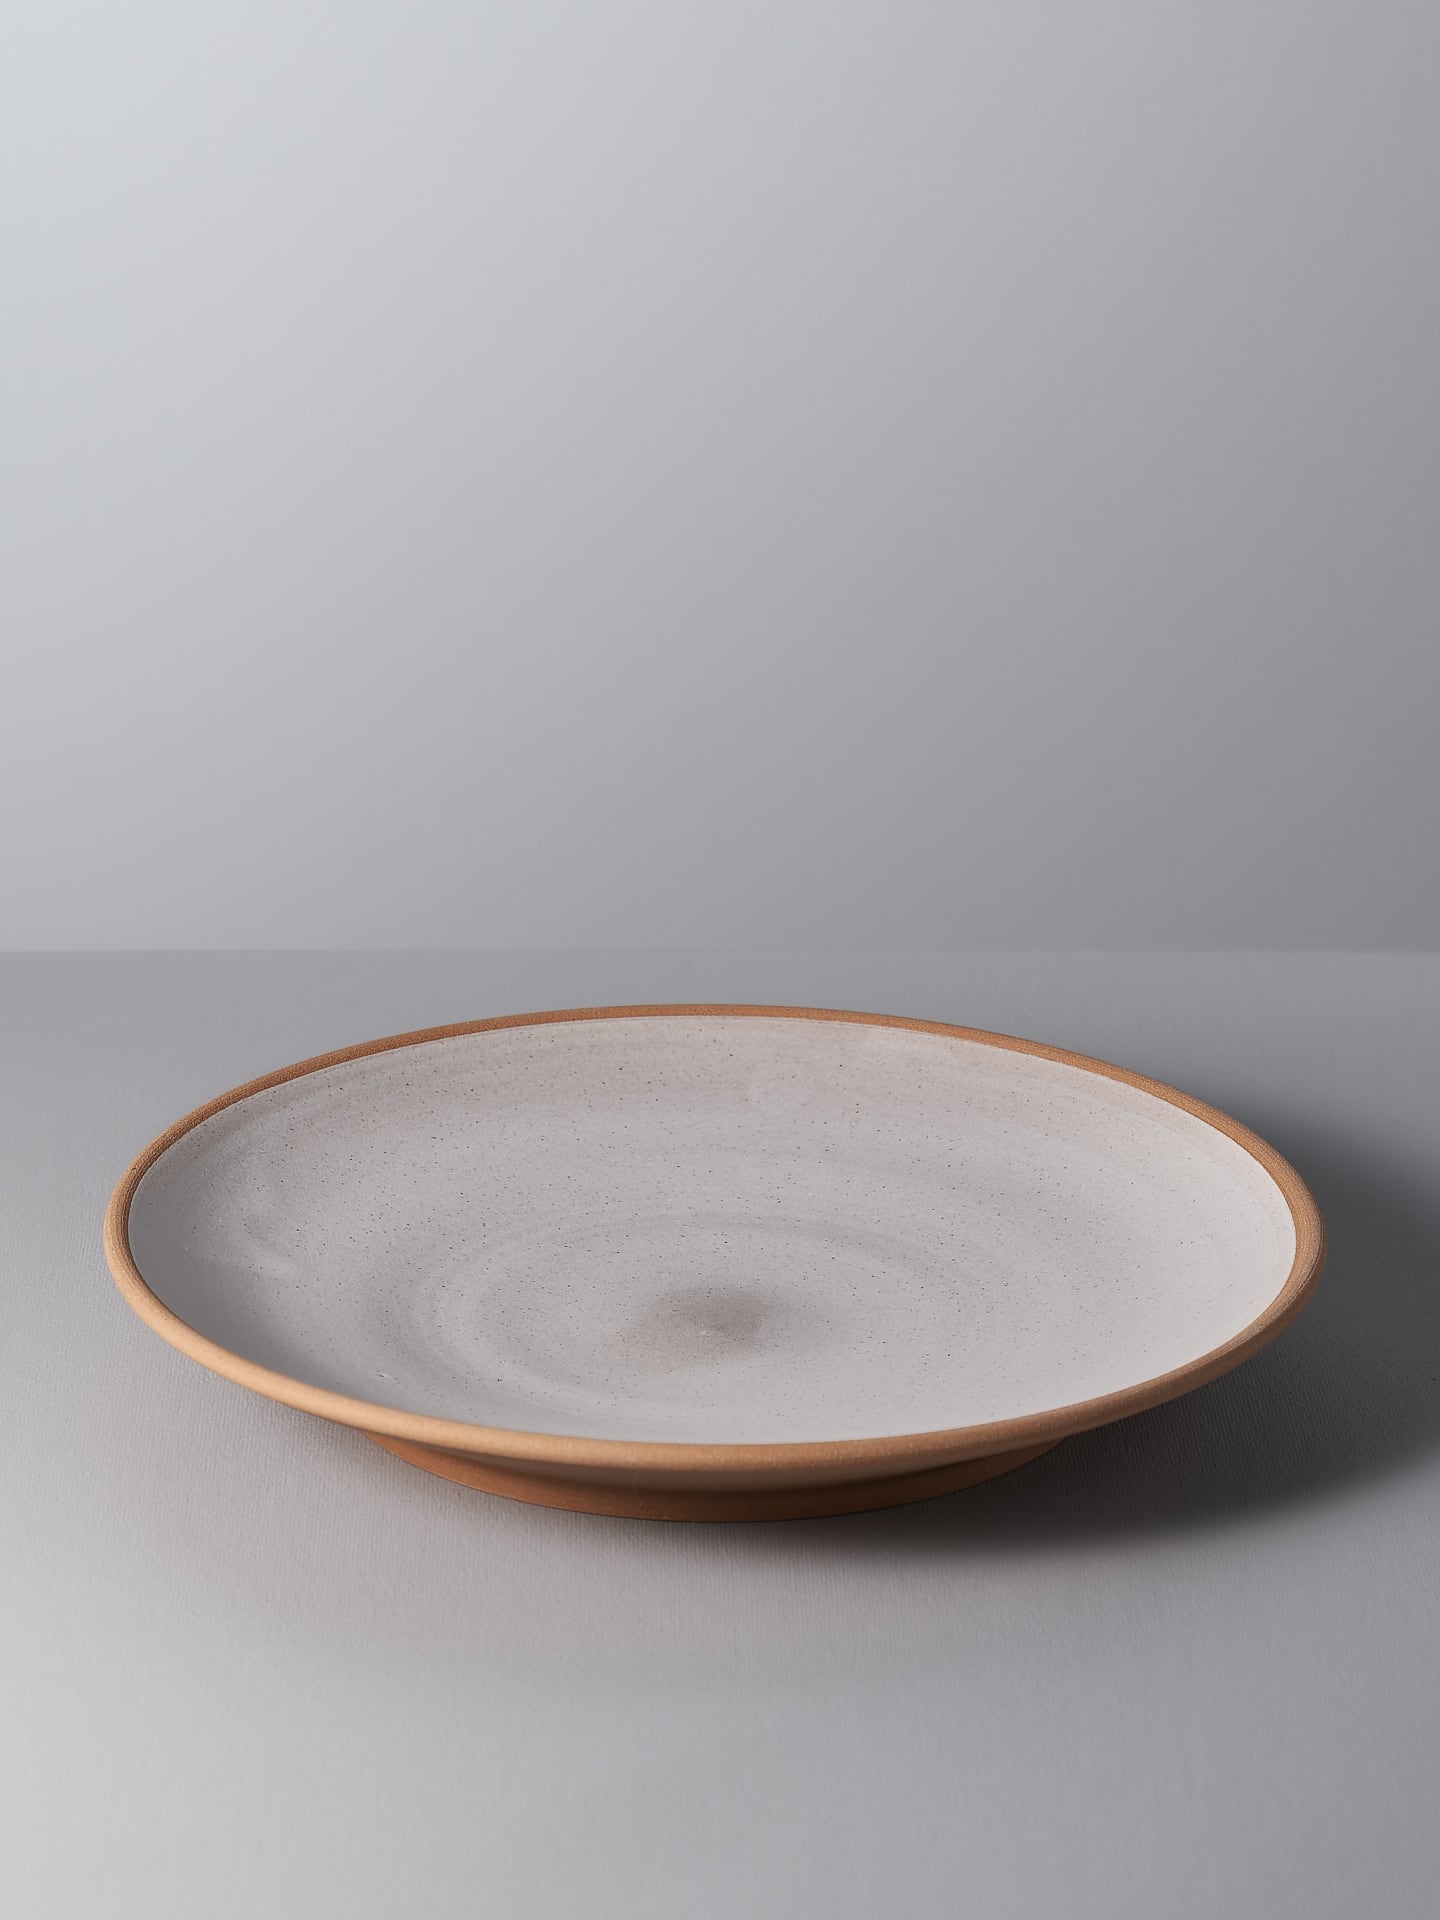 A small platter - Toast by Nicola Shuttleworth with a brown rim sitting on a grey surface.